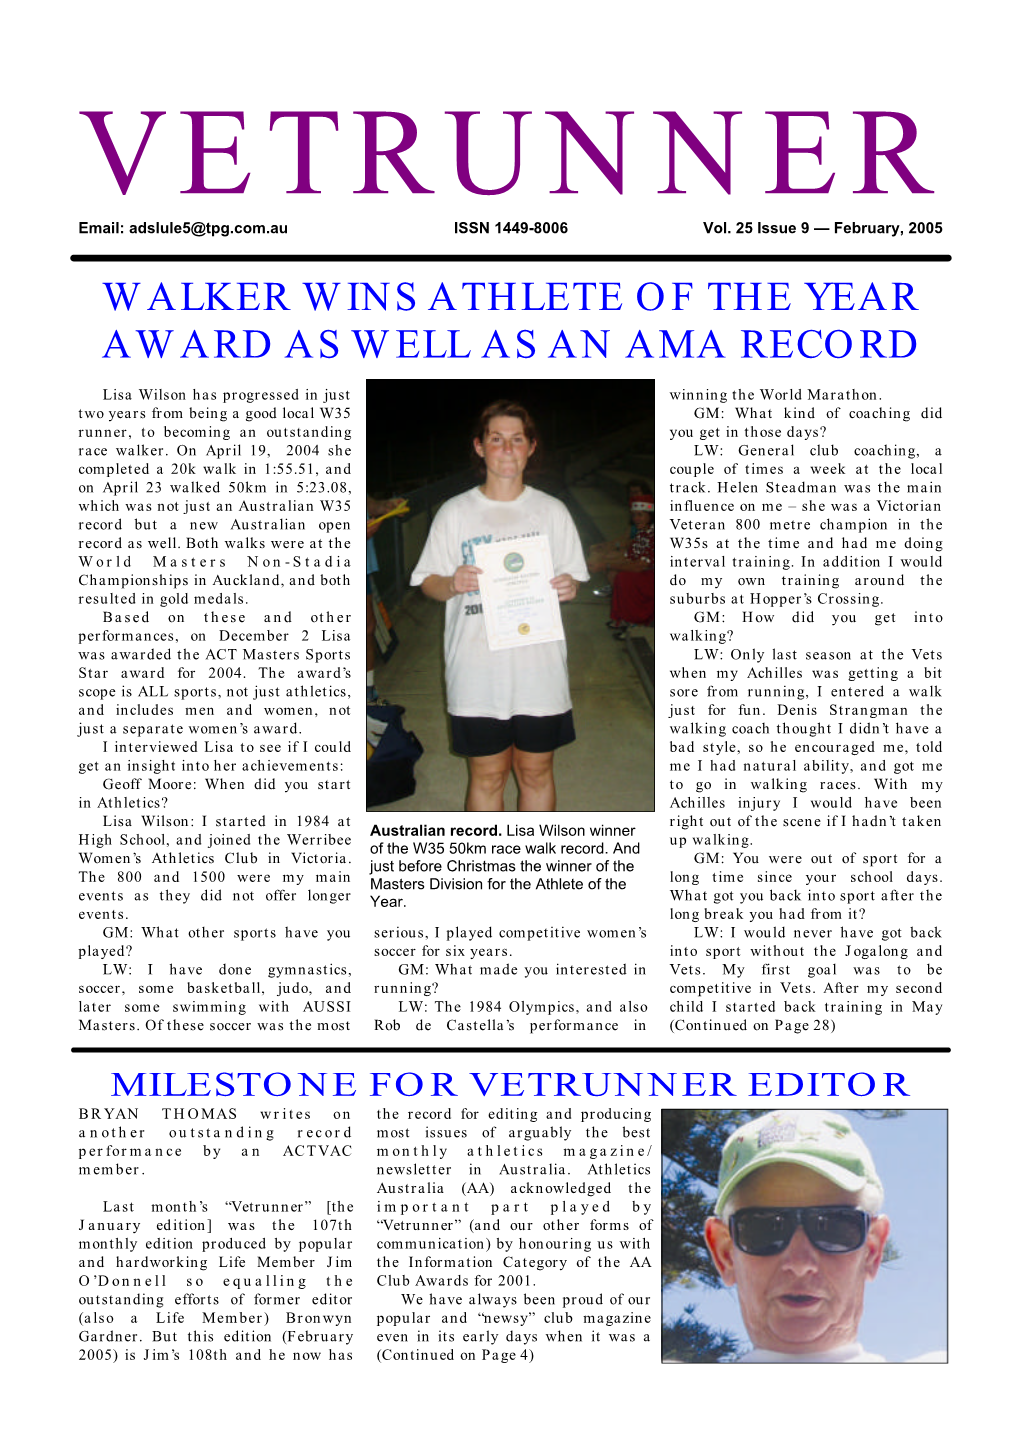 Walker Wins Athlete of the Year Award As Well As an Ama Record